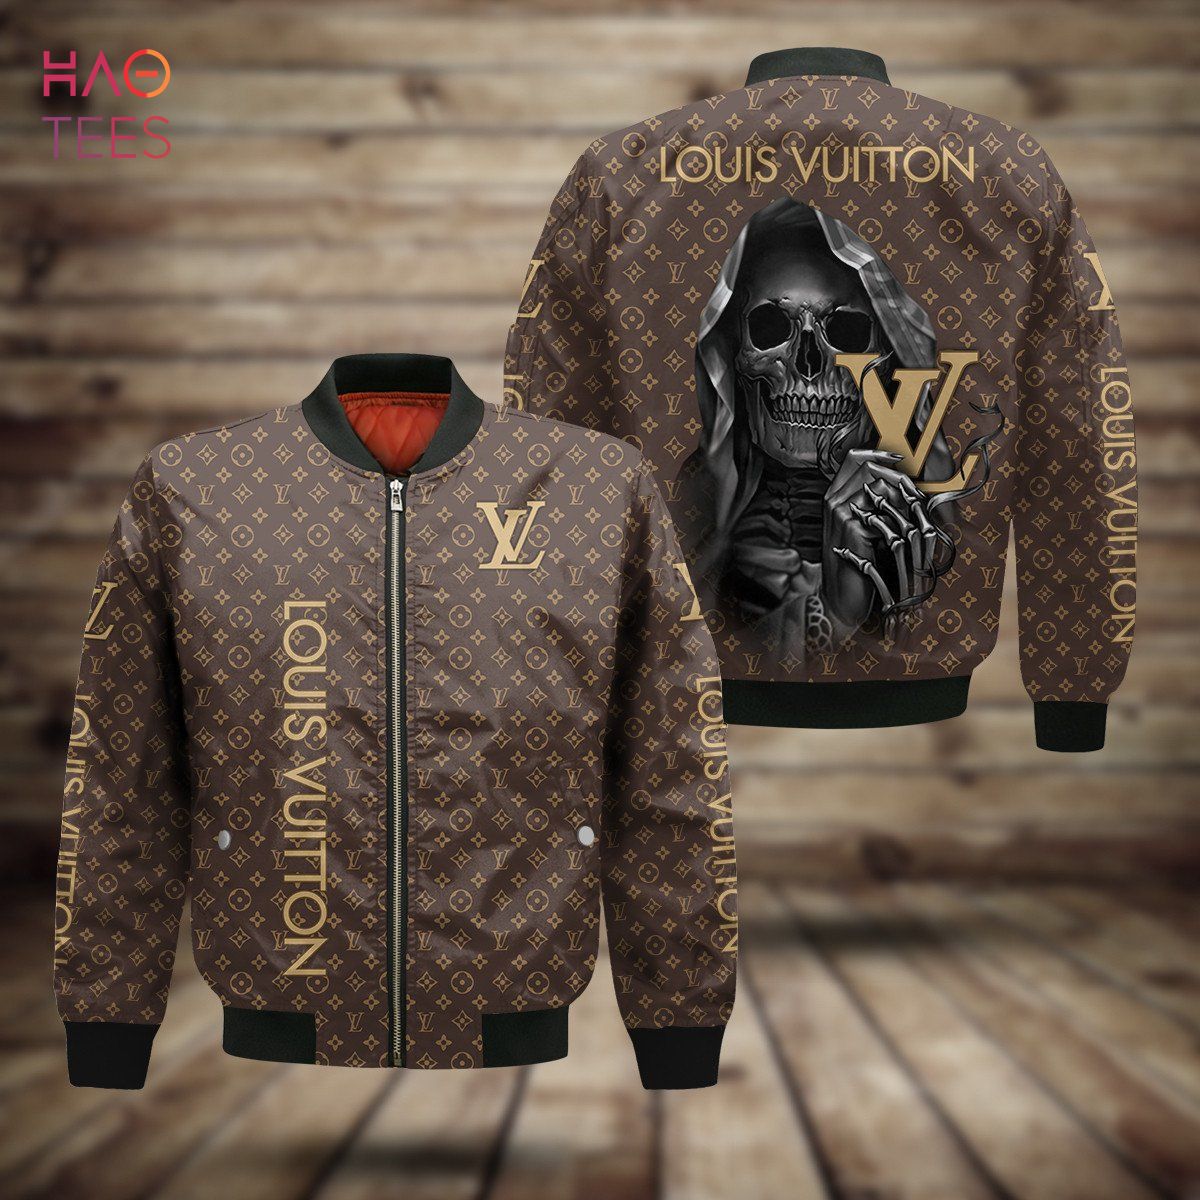 THE BEST Louis Vuitton Skull 3D Printing Luxury Brand Bomber Jacket Limited Edition